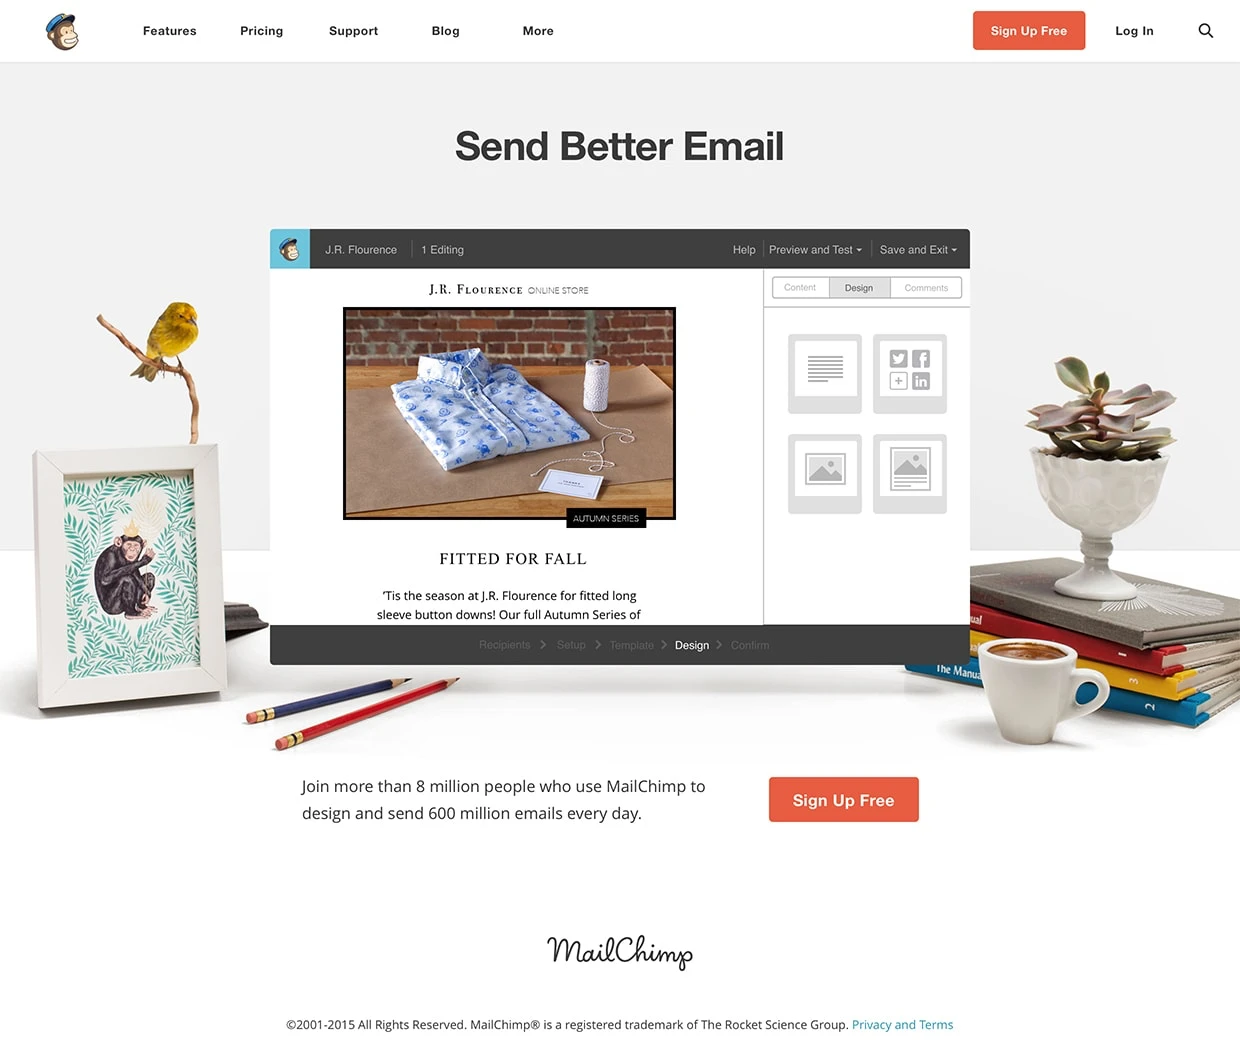 Mailchimp Landing Page Example: MailChimp is the best way to design, send, and share email newsletters.